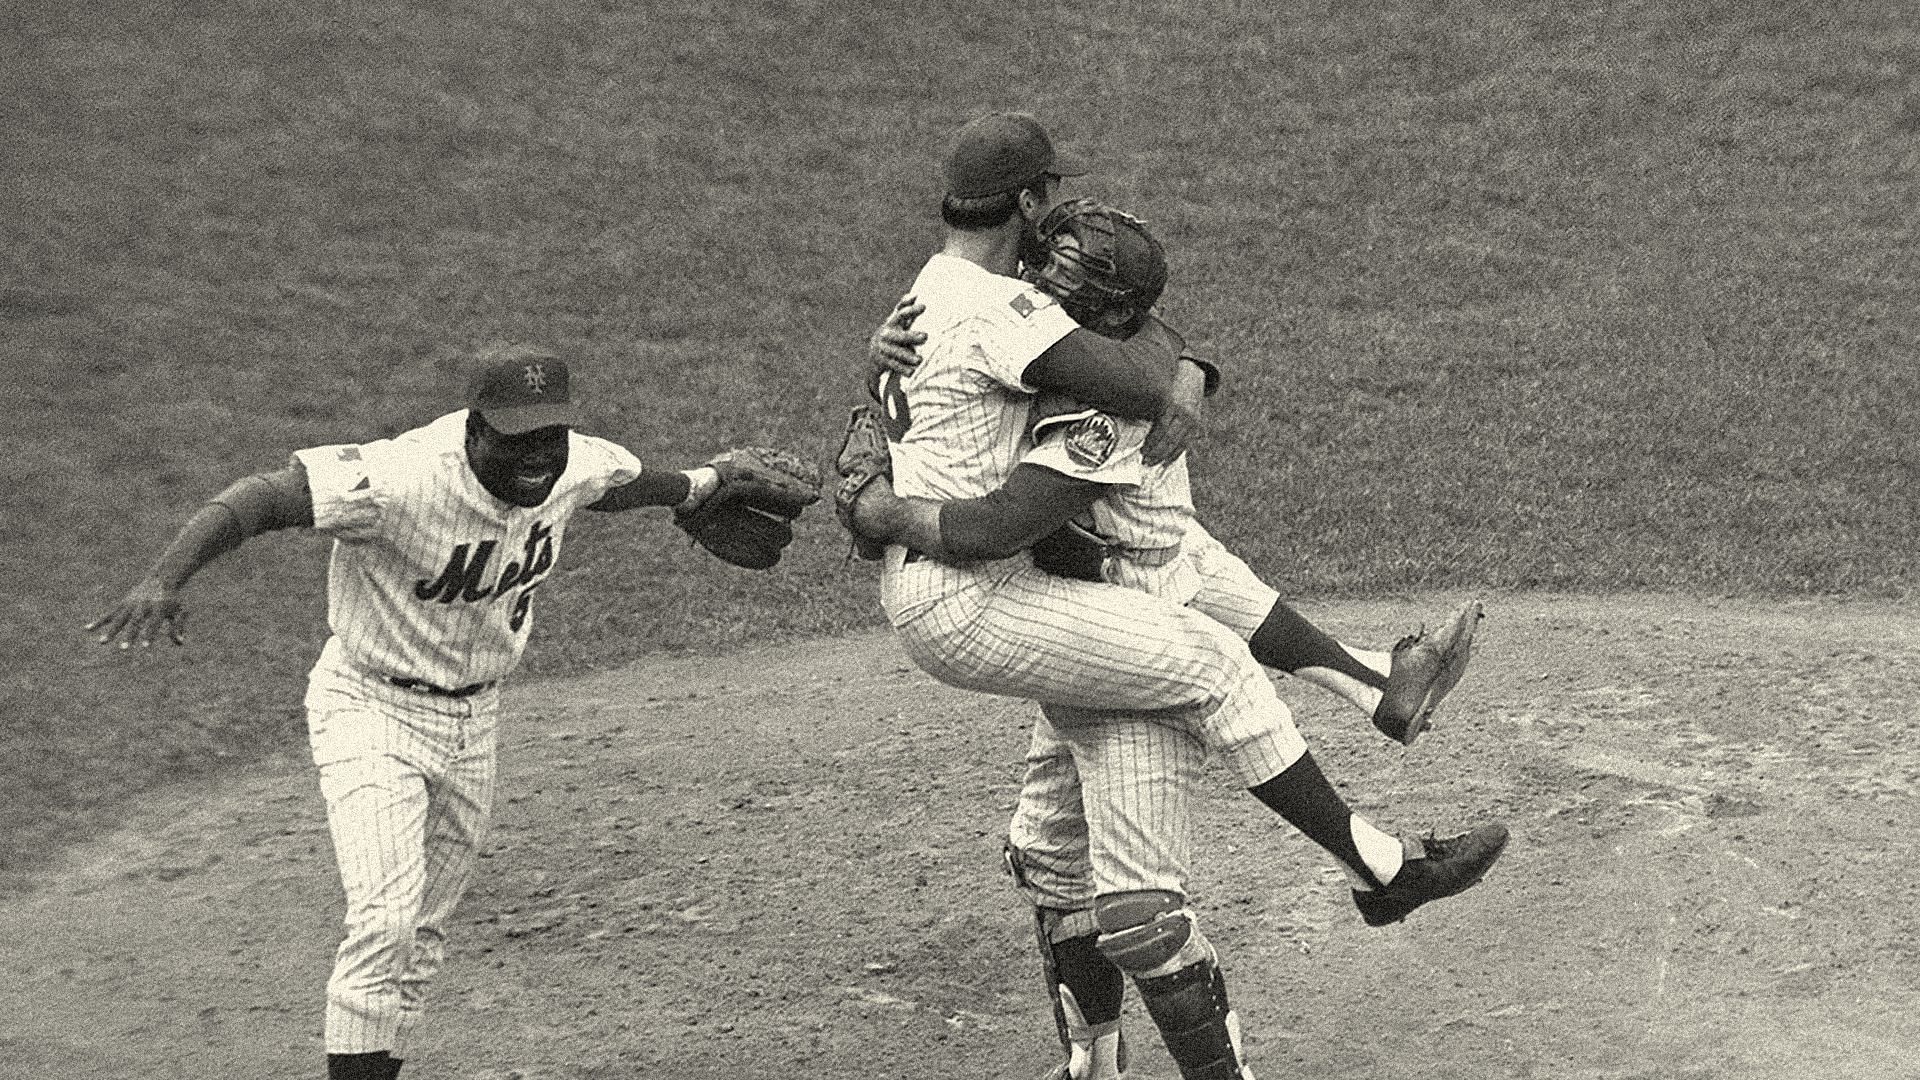 The 1969 &quot;Miracle Mets&quot; staged one of the greatest comebacks in MLB history. (Image from americanheritage.com)